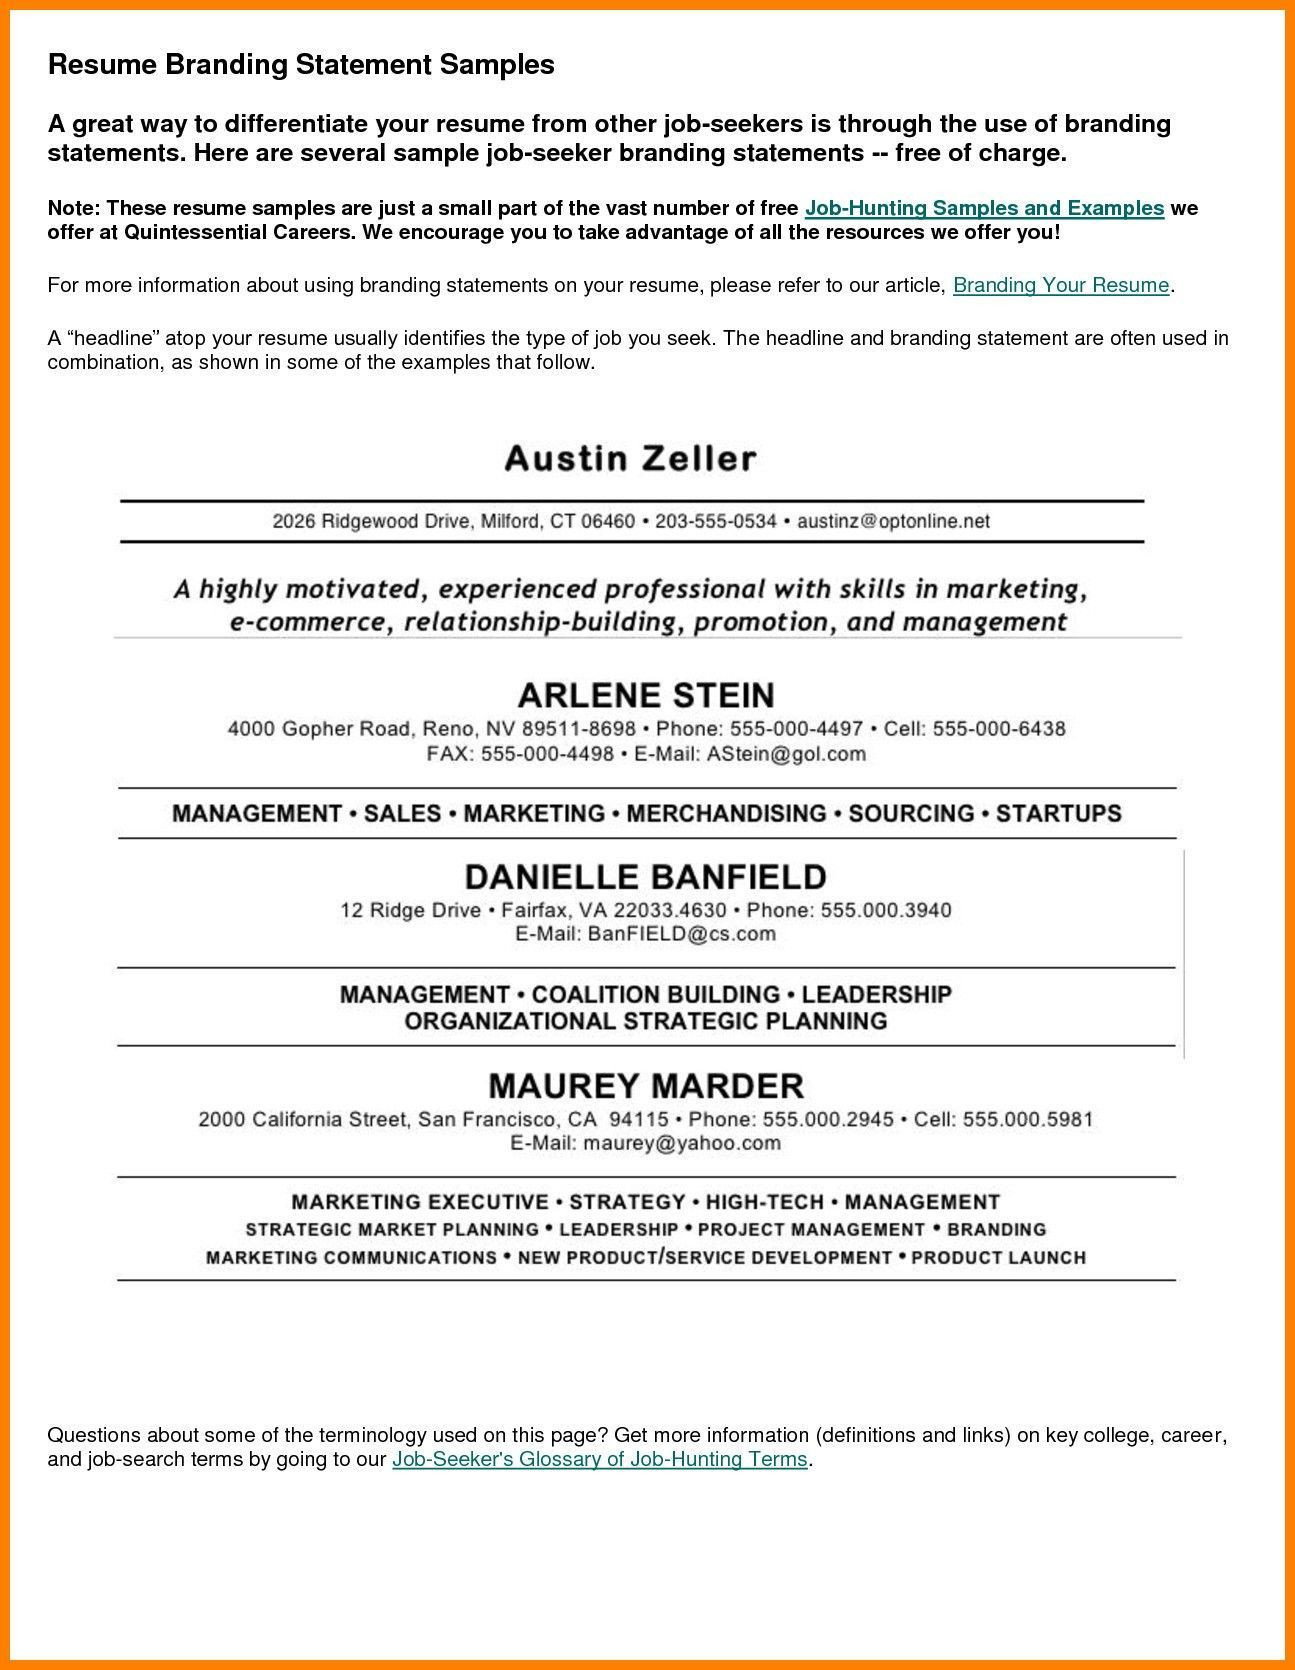 Samples Of Personal Brand Statements On Resumes Personal Statement Examples for Jobs Personal Statement Examples …